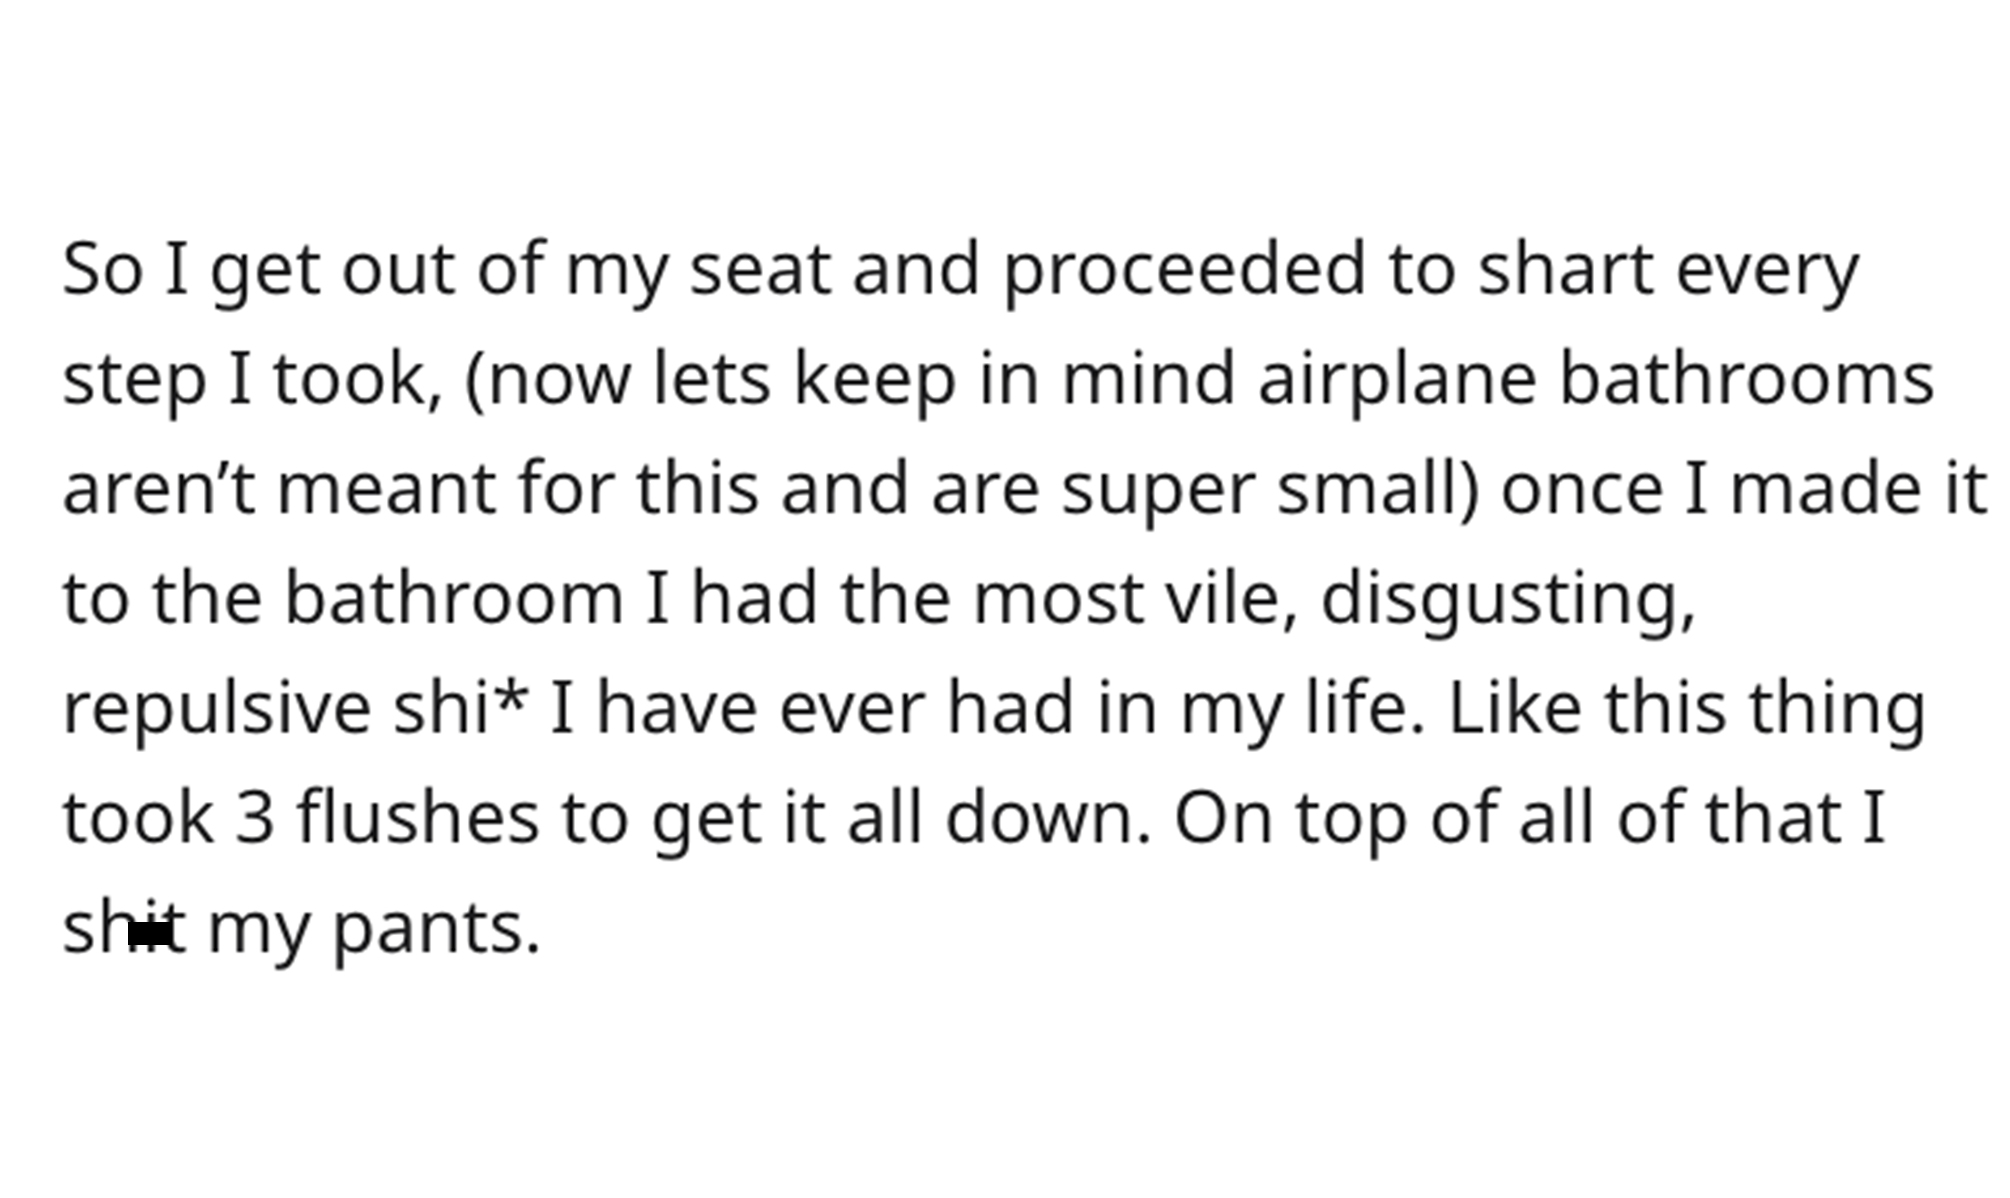 Sharting Mid-Flight - paper - So I get out of my seat and proceeded to shart every step I took, now lets keep in mind airplane bathrooms aren't meant for this and are super small once I made it to the bathroom I had the most vile, disgusting, repulsive sh